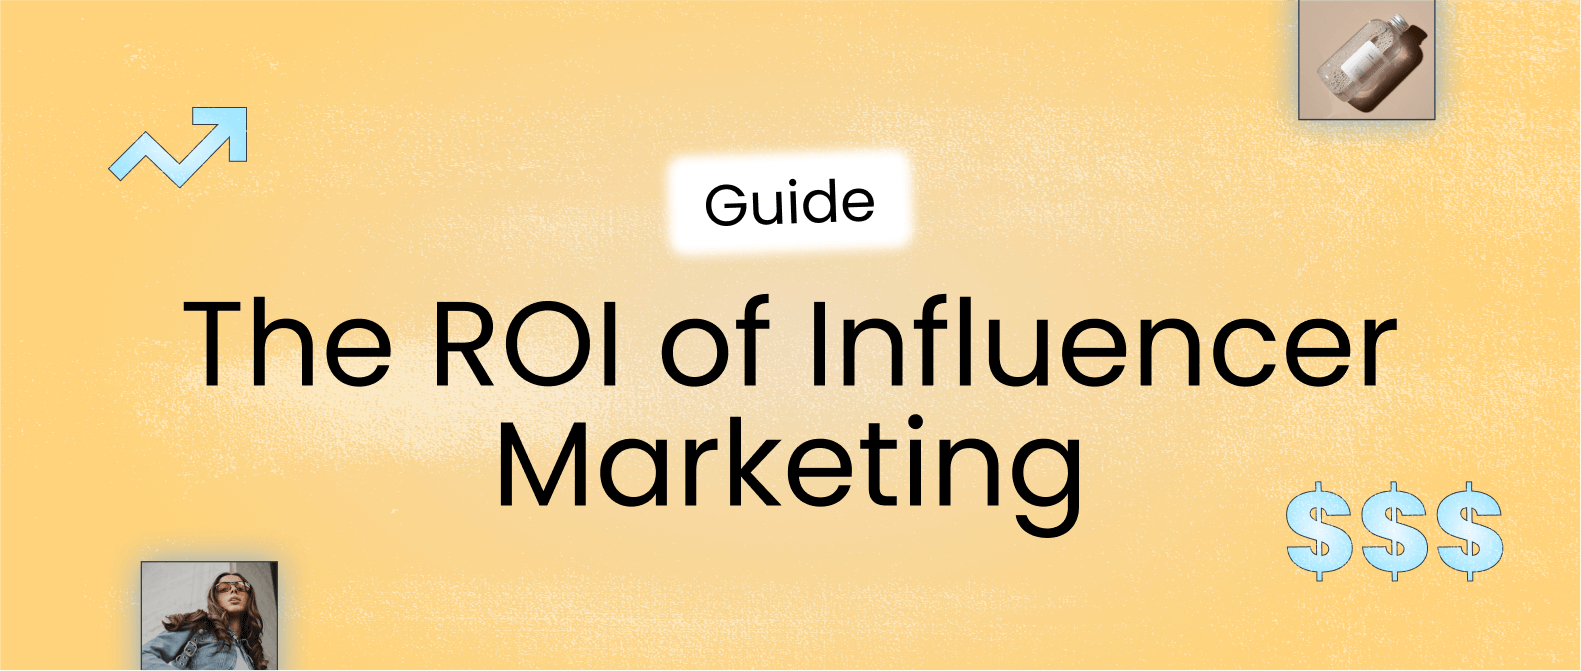 header image for later’s influencer marketing roi guide 